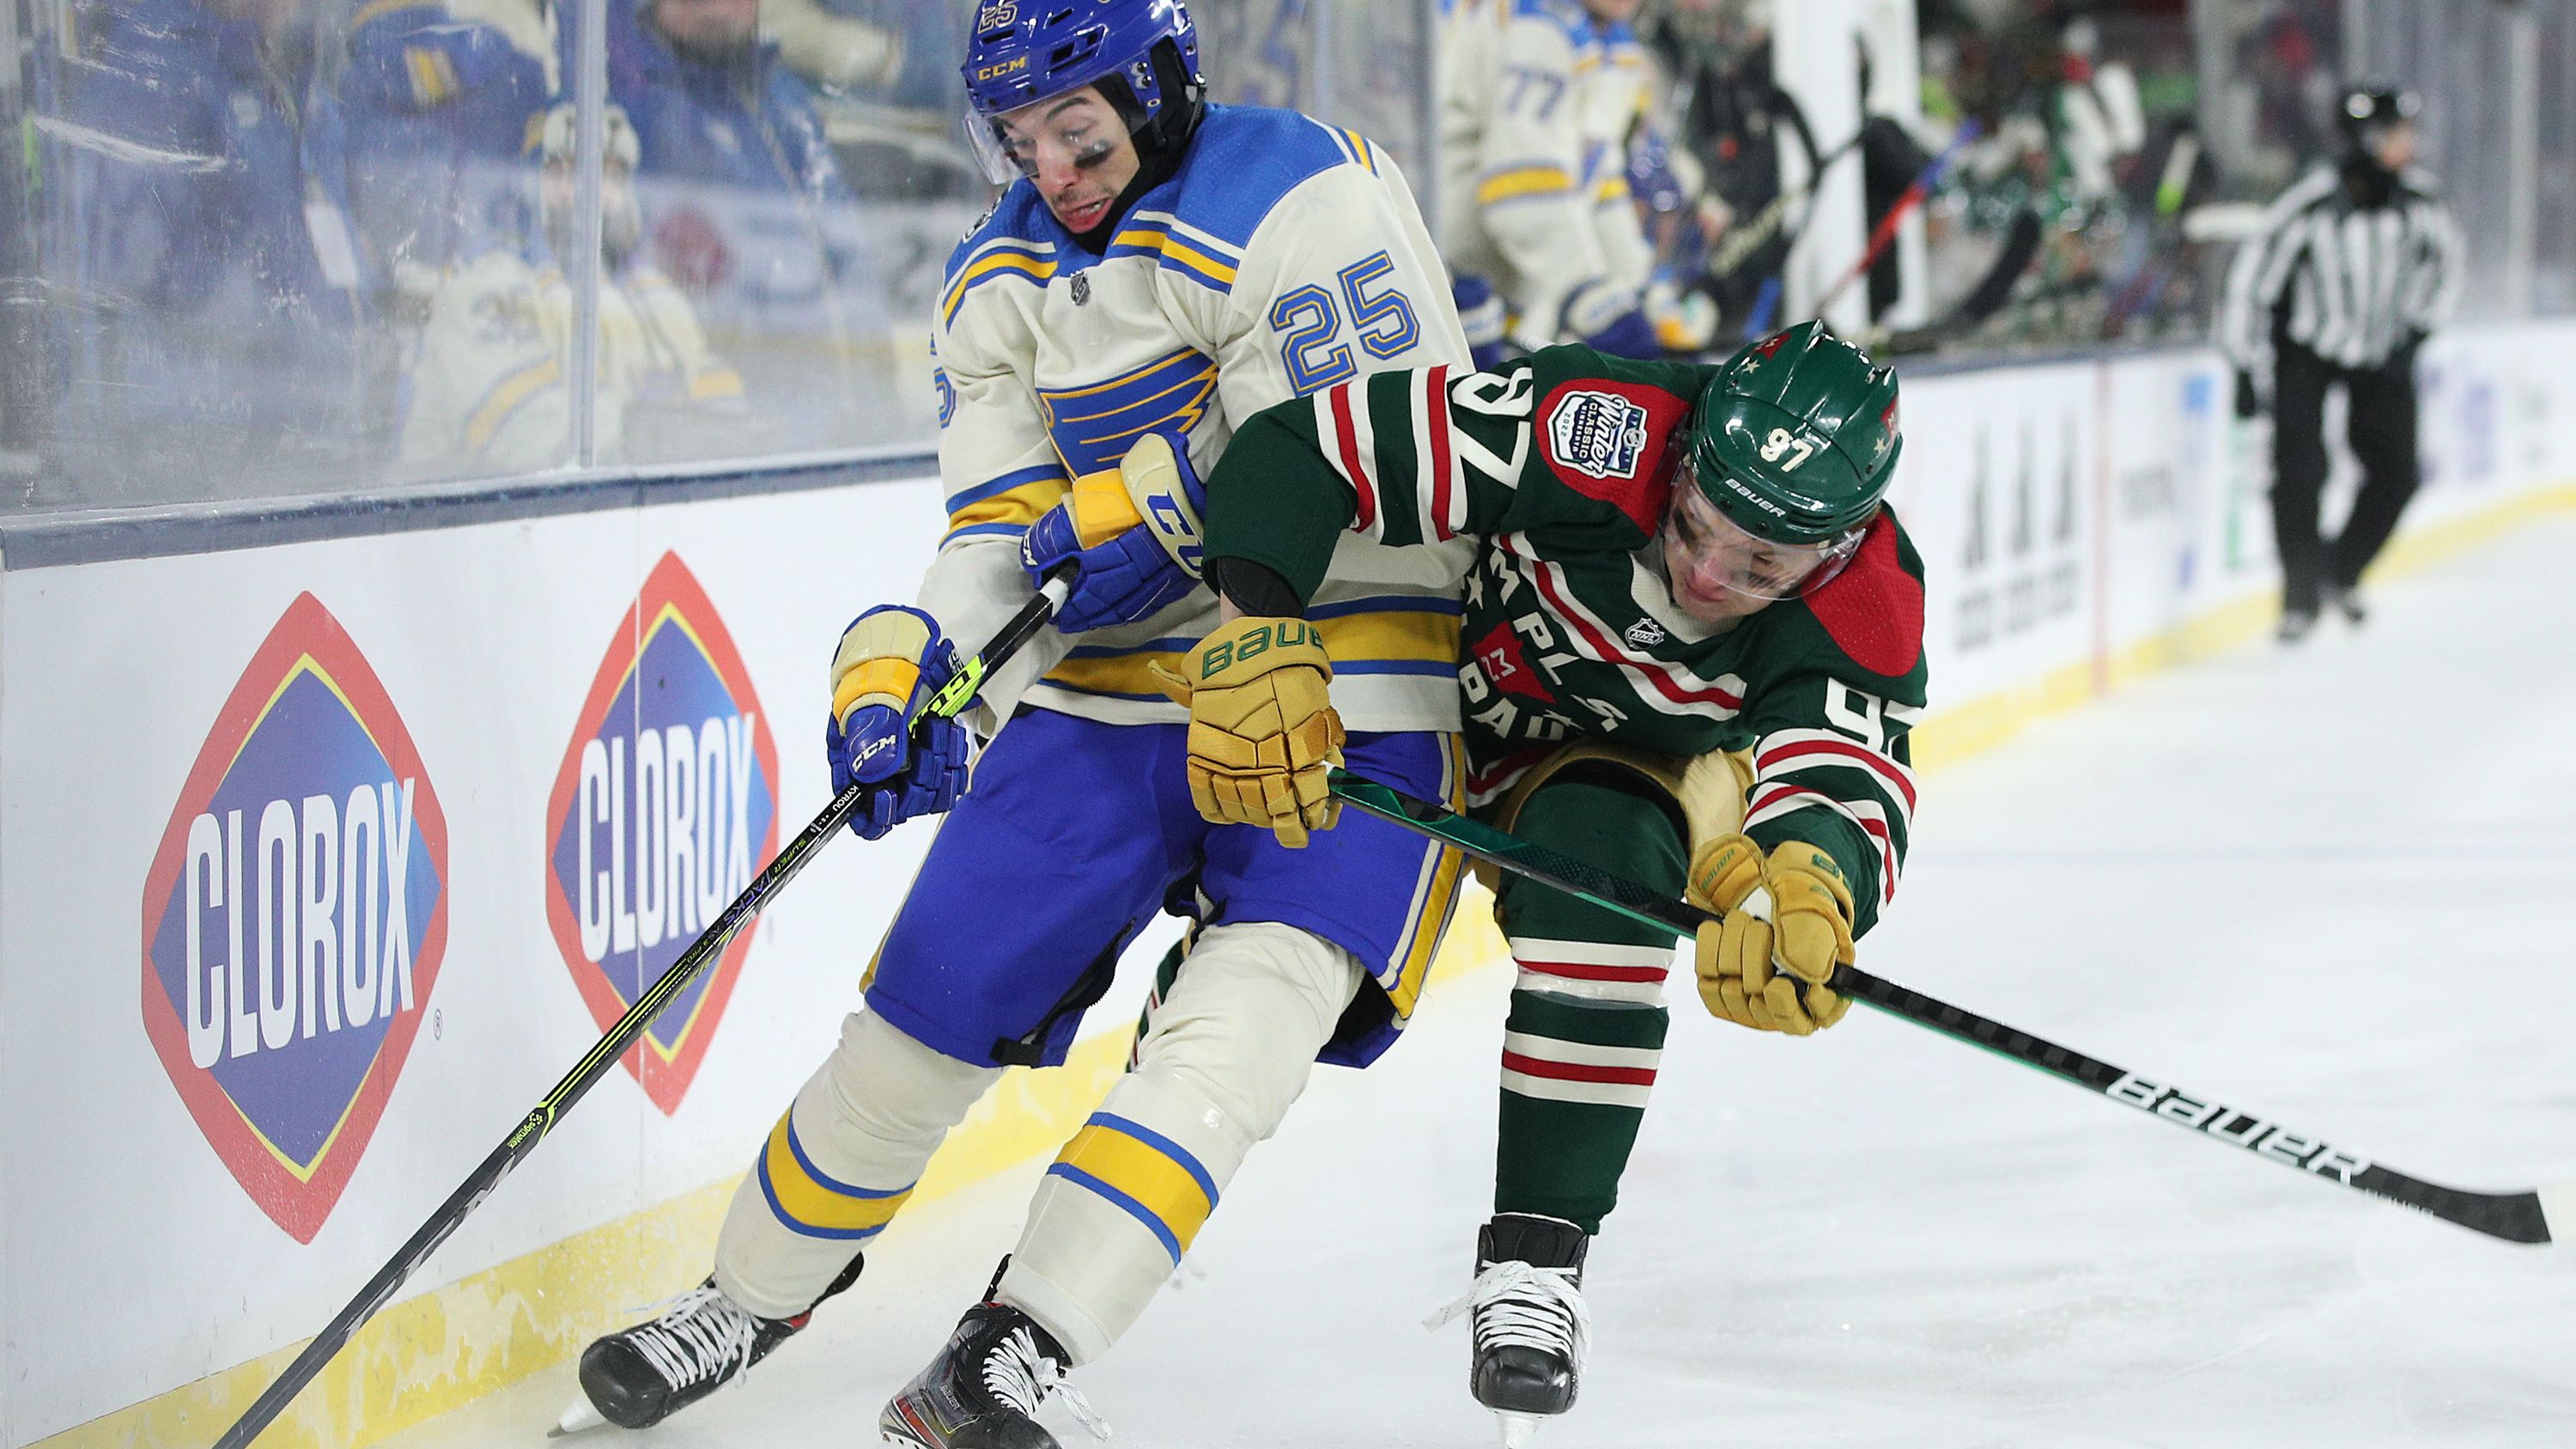 St. Louis Blues beat Minnesota Wild 6-4 in coldest outdoor game in NHL history